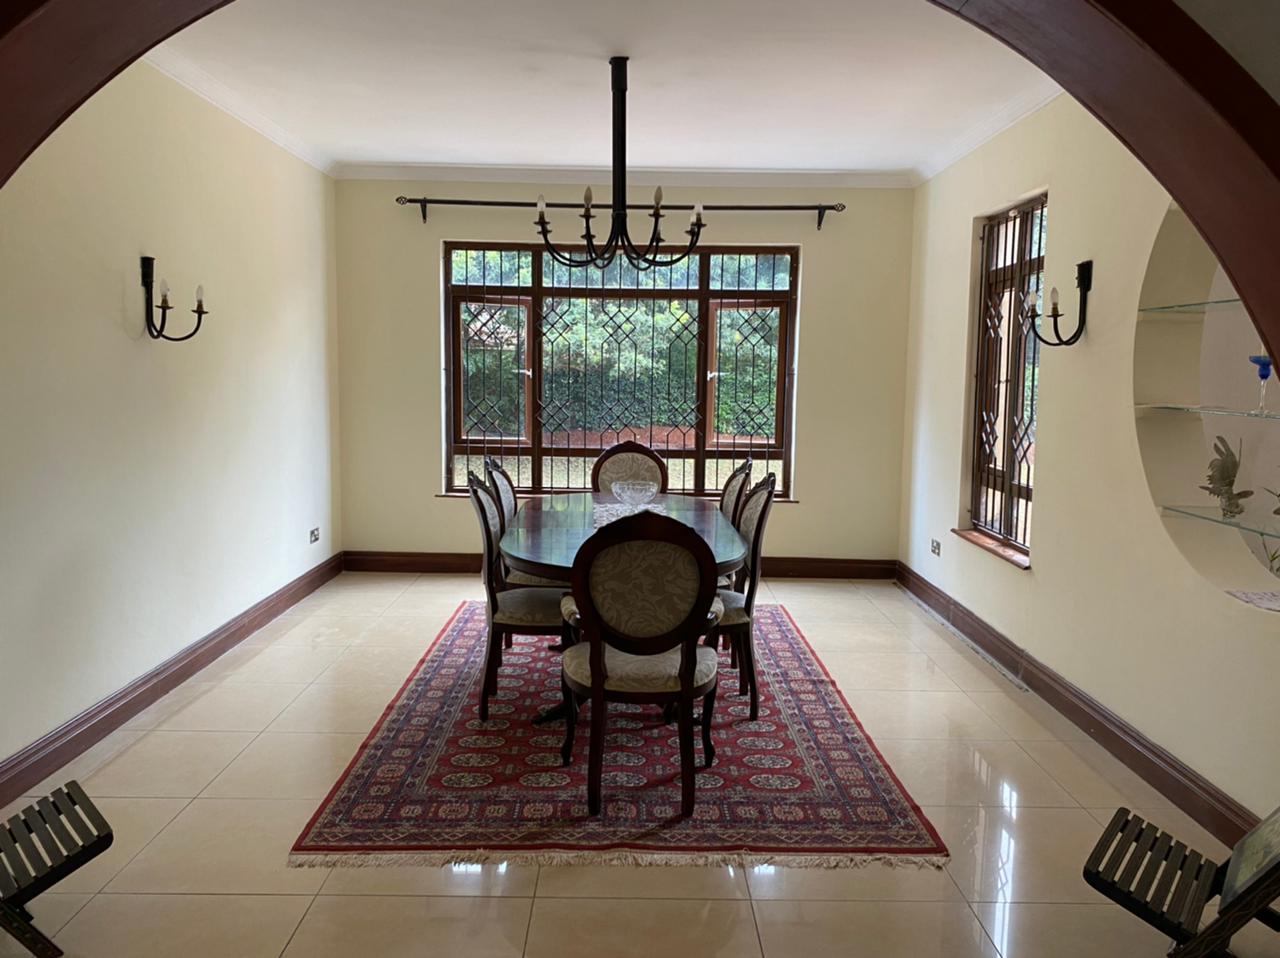 5 bedrooms Villa all bedrooms en-suite for rent at Ksh400k located in Kitisuru in a gated community but own compound sitting on half acre. With a spacious kitchen, dining area, study room15